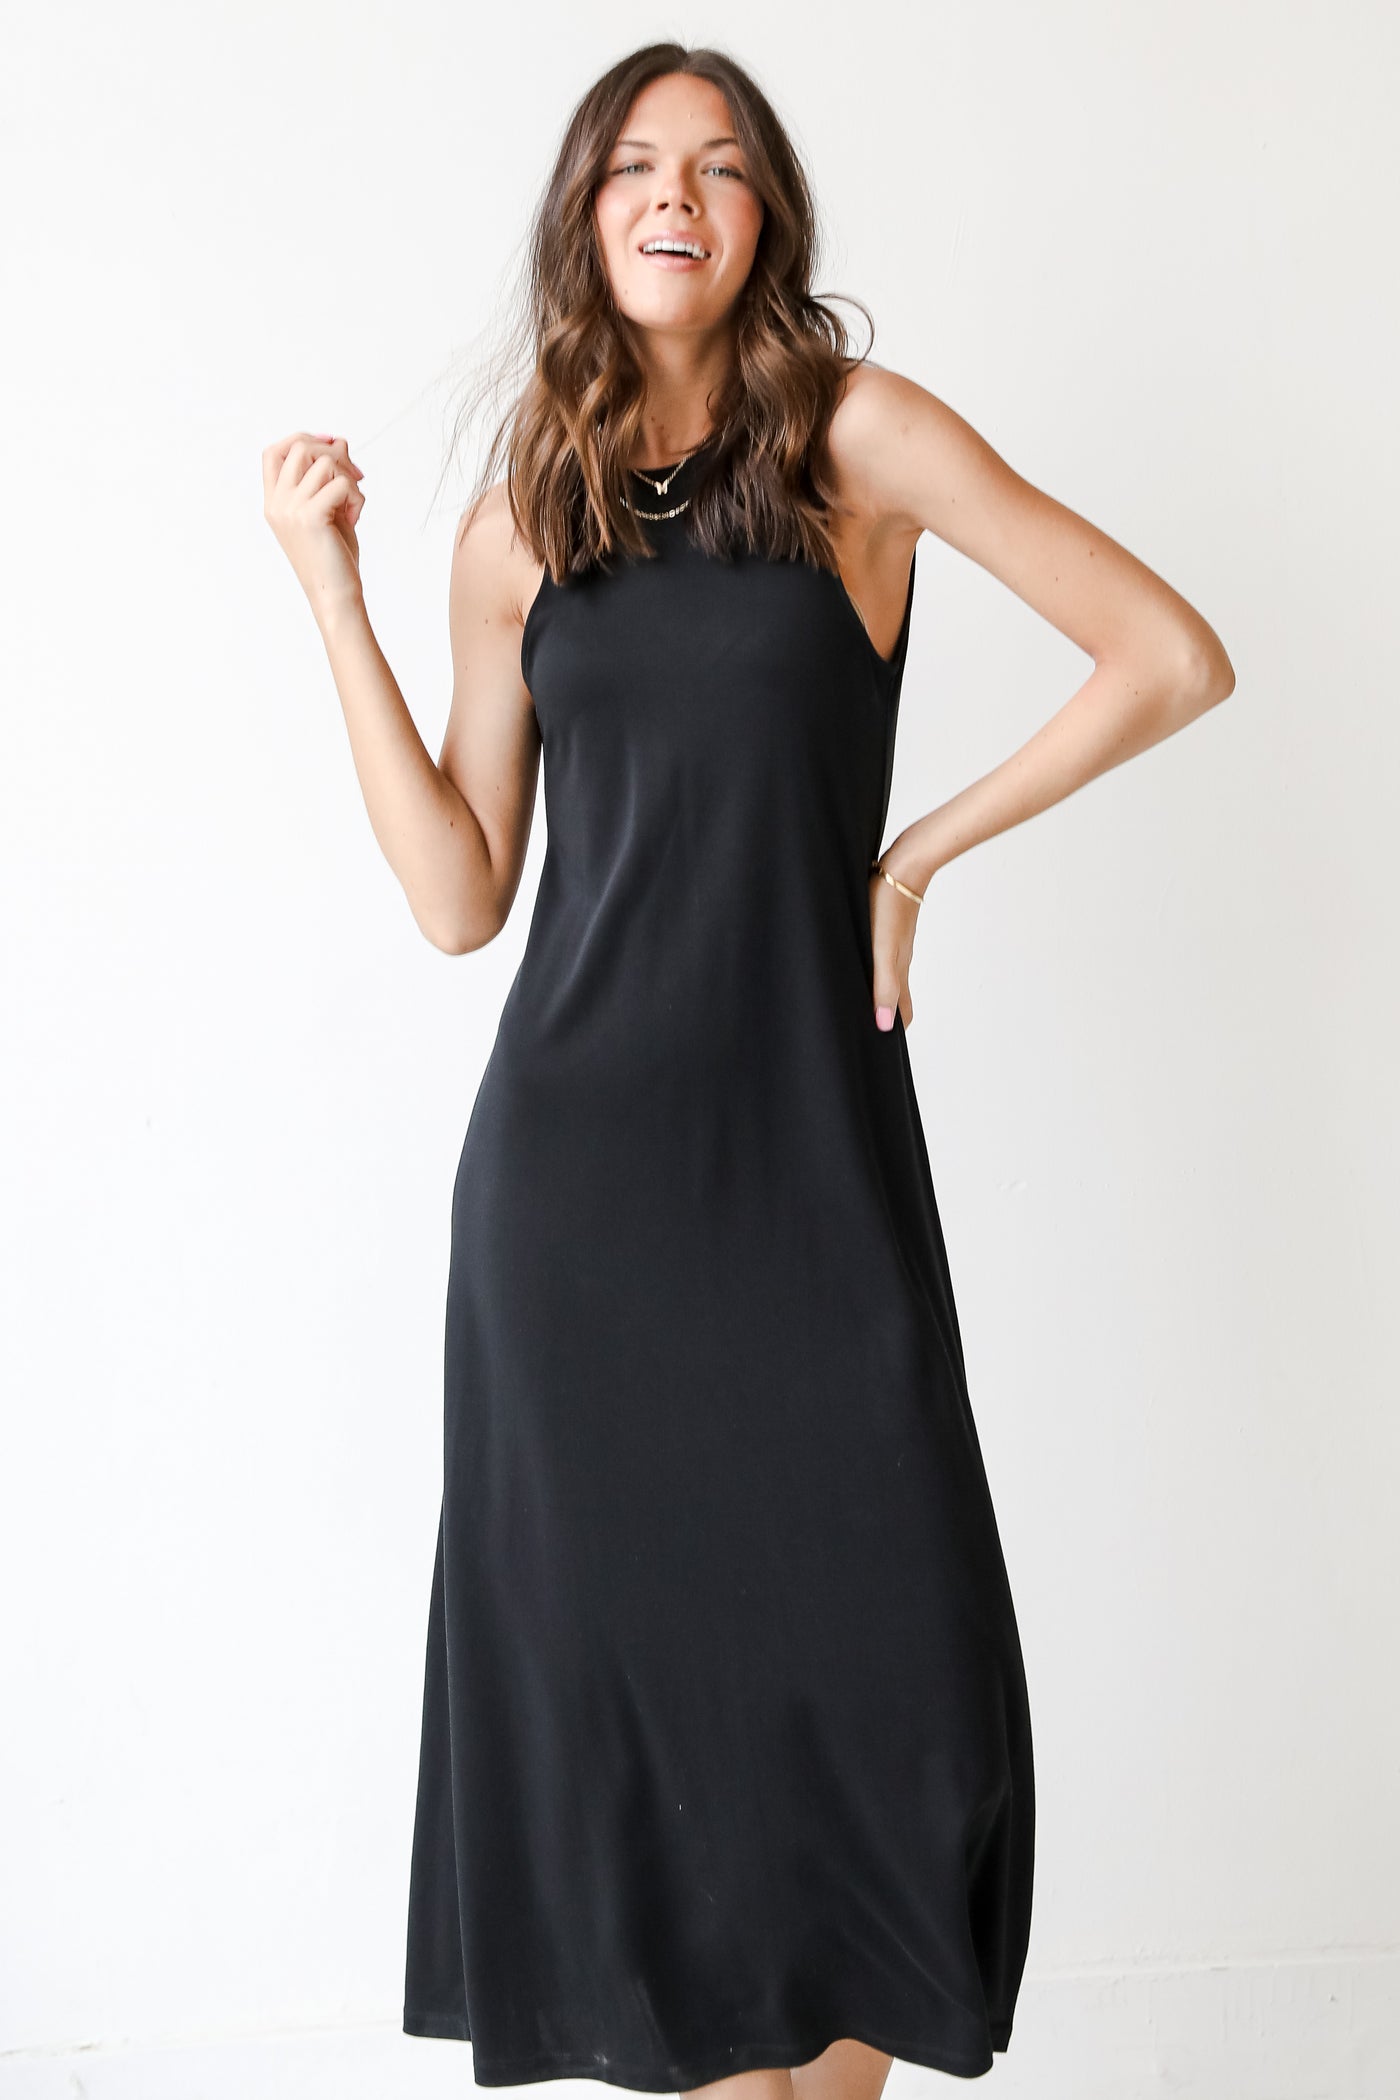 Maxi Dress in black front view